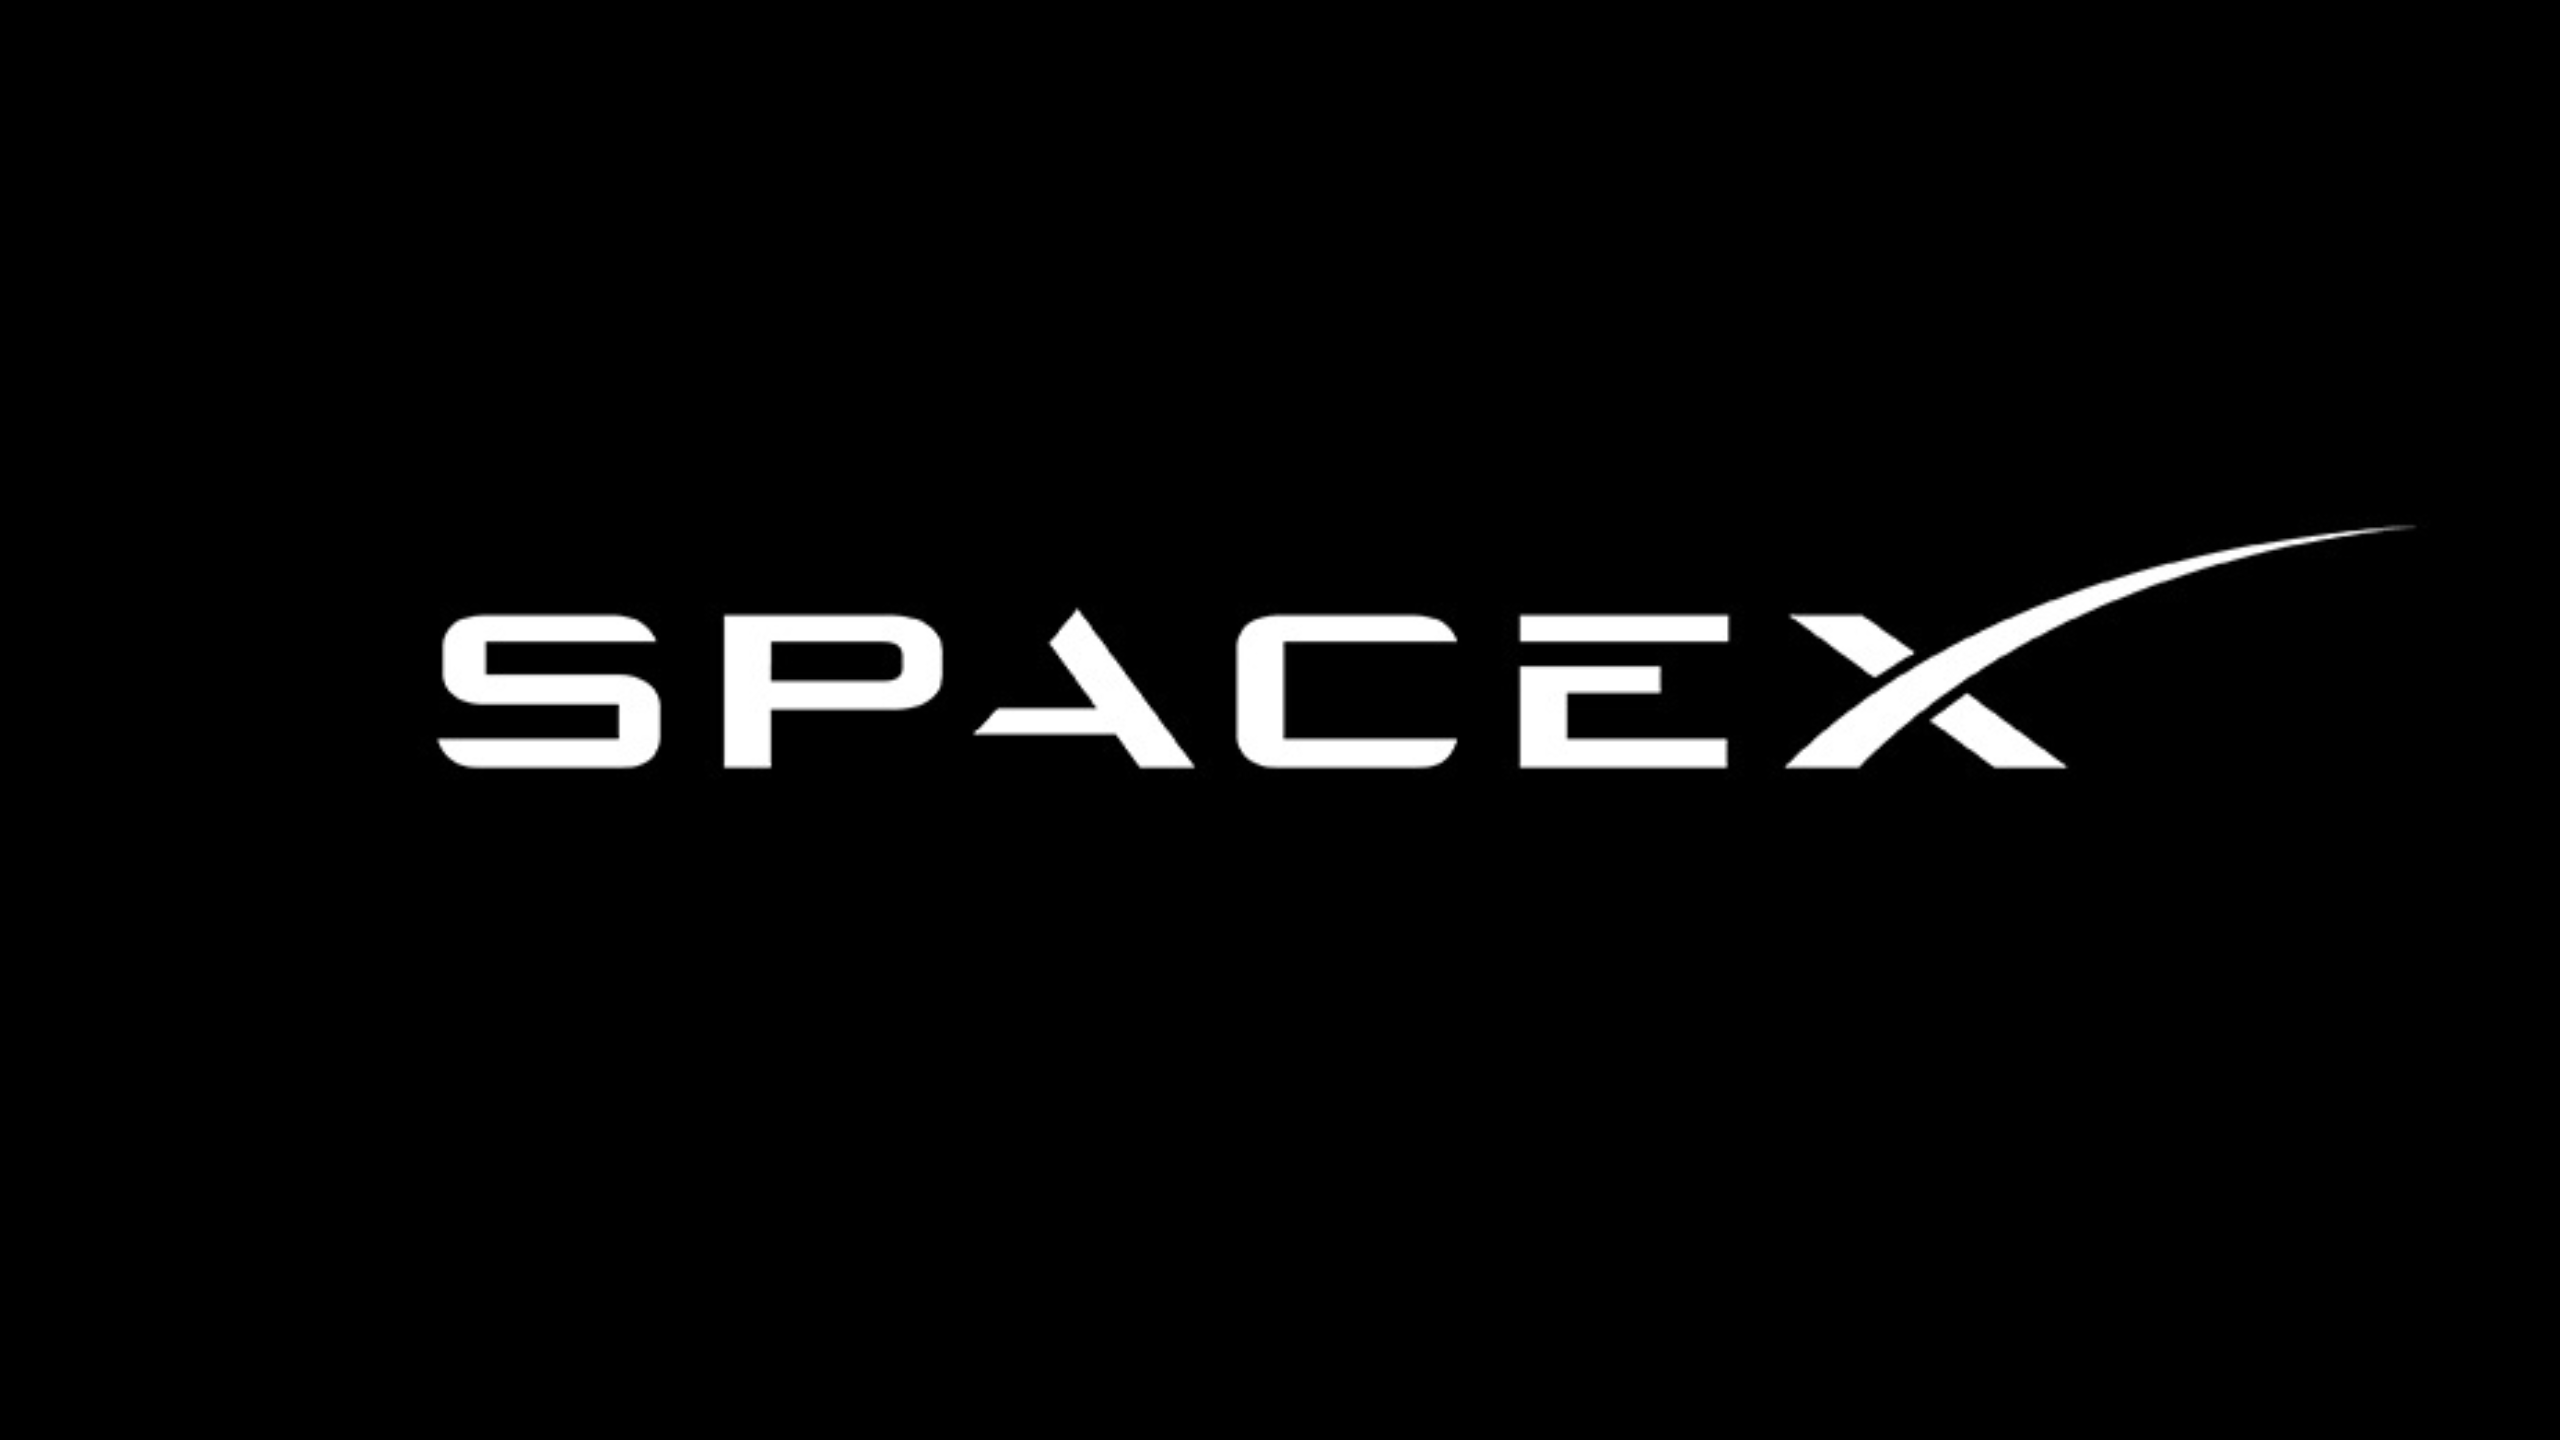 Burglar arrested for breaking into SpaceX security vehicles